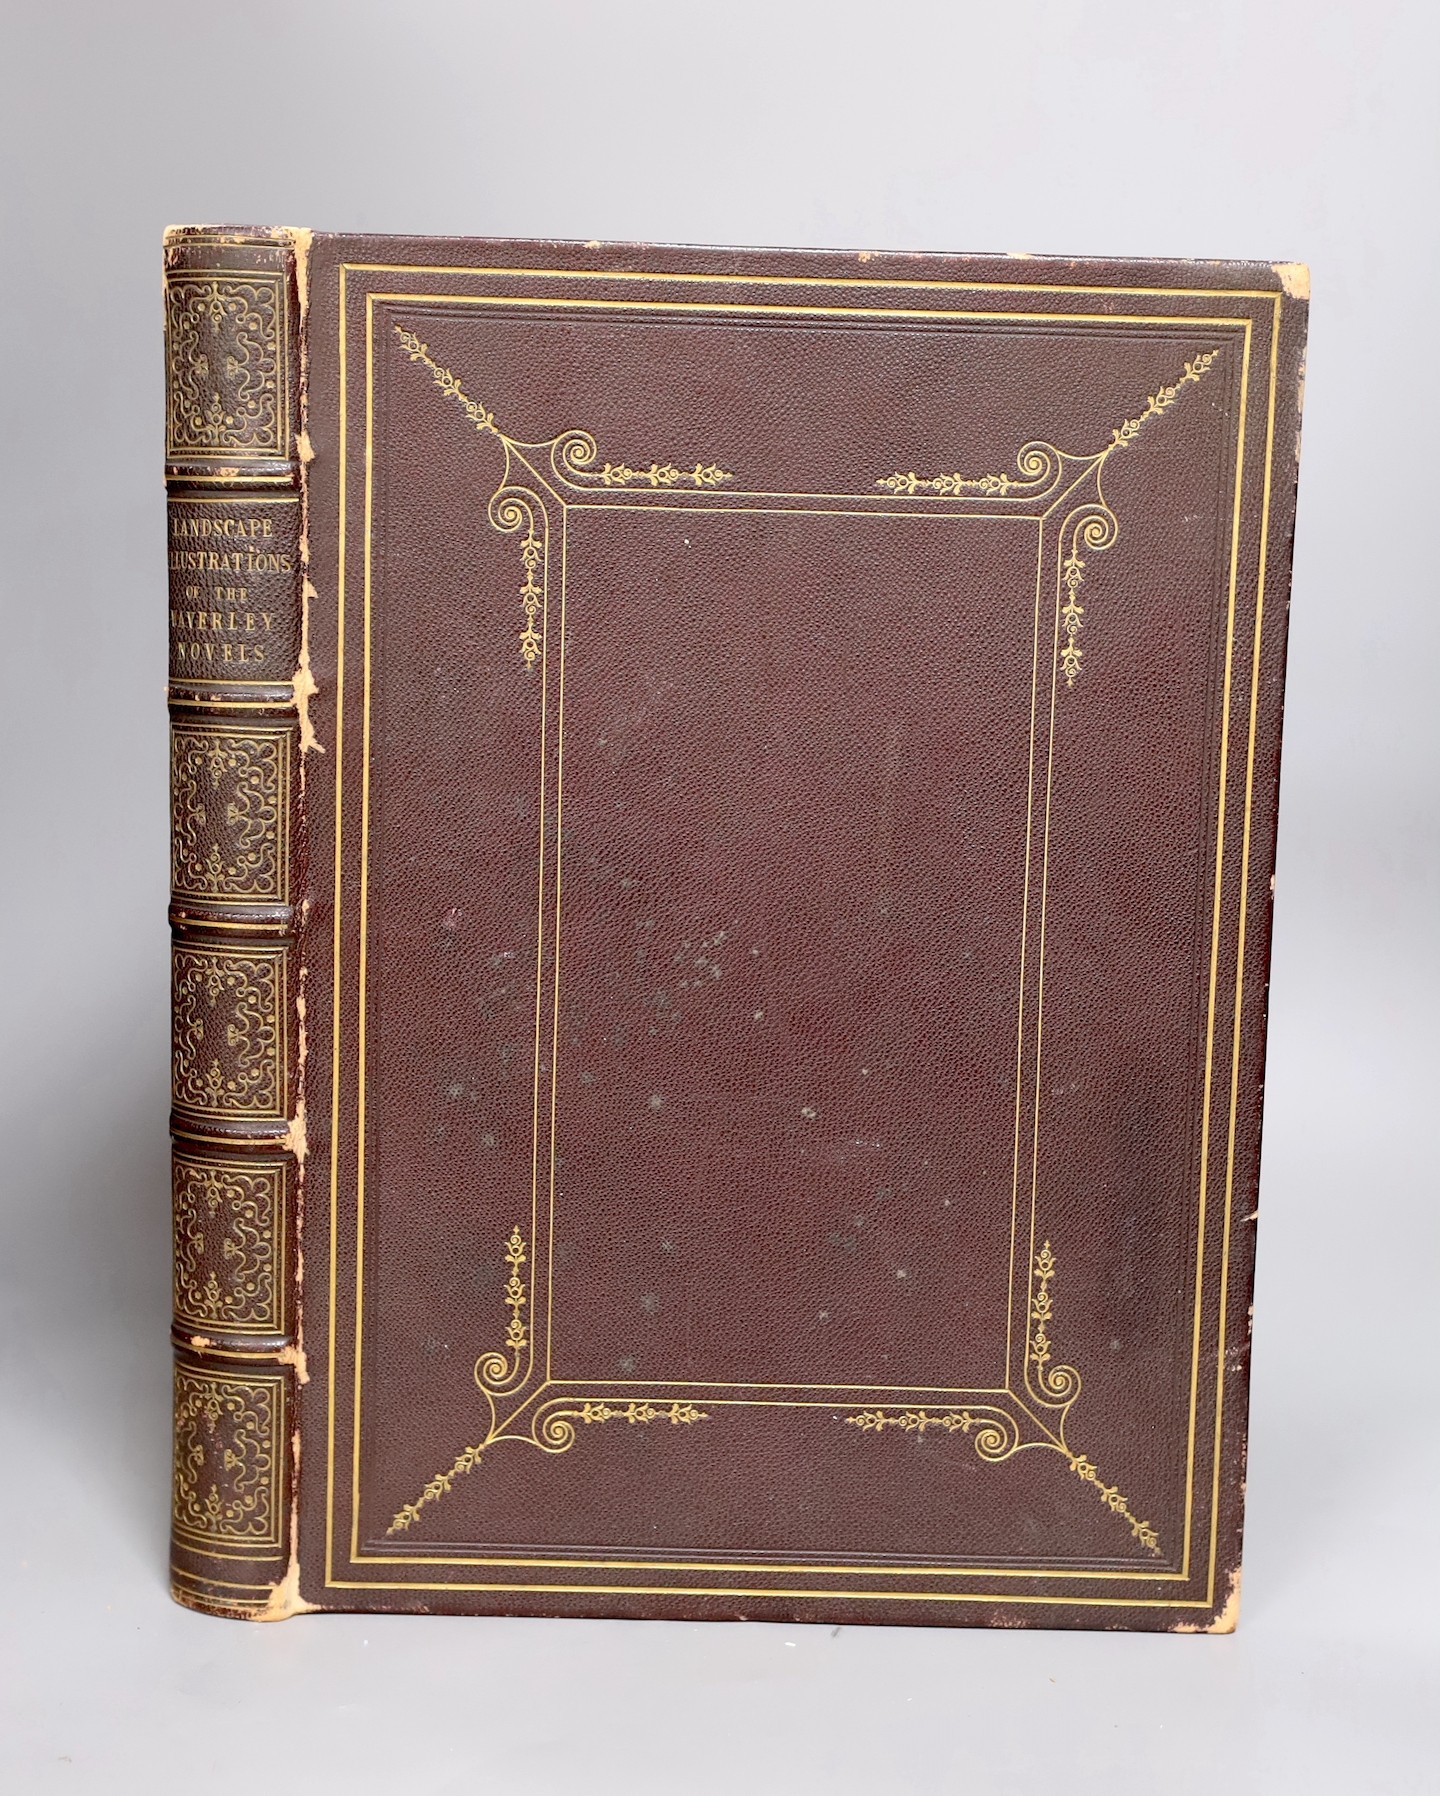 [Scott, Sir Walter. Landscape Illustrations of the Waverley Novels]. lacks all letterpress, incl. title; 79 engraved plates (with guards); maroon gilt-decorated morocco with panelled spine, ge. and marbled e/ps.. folio.